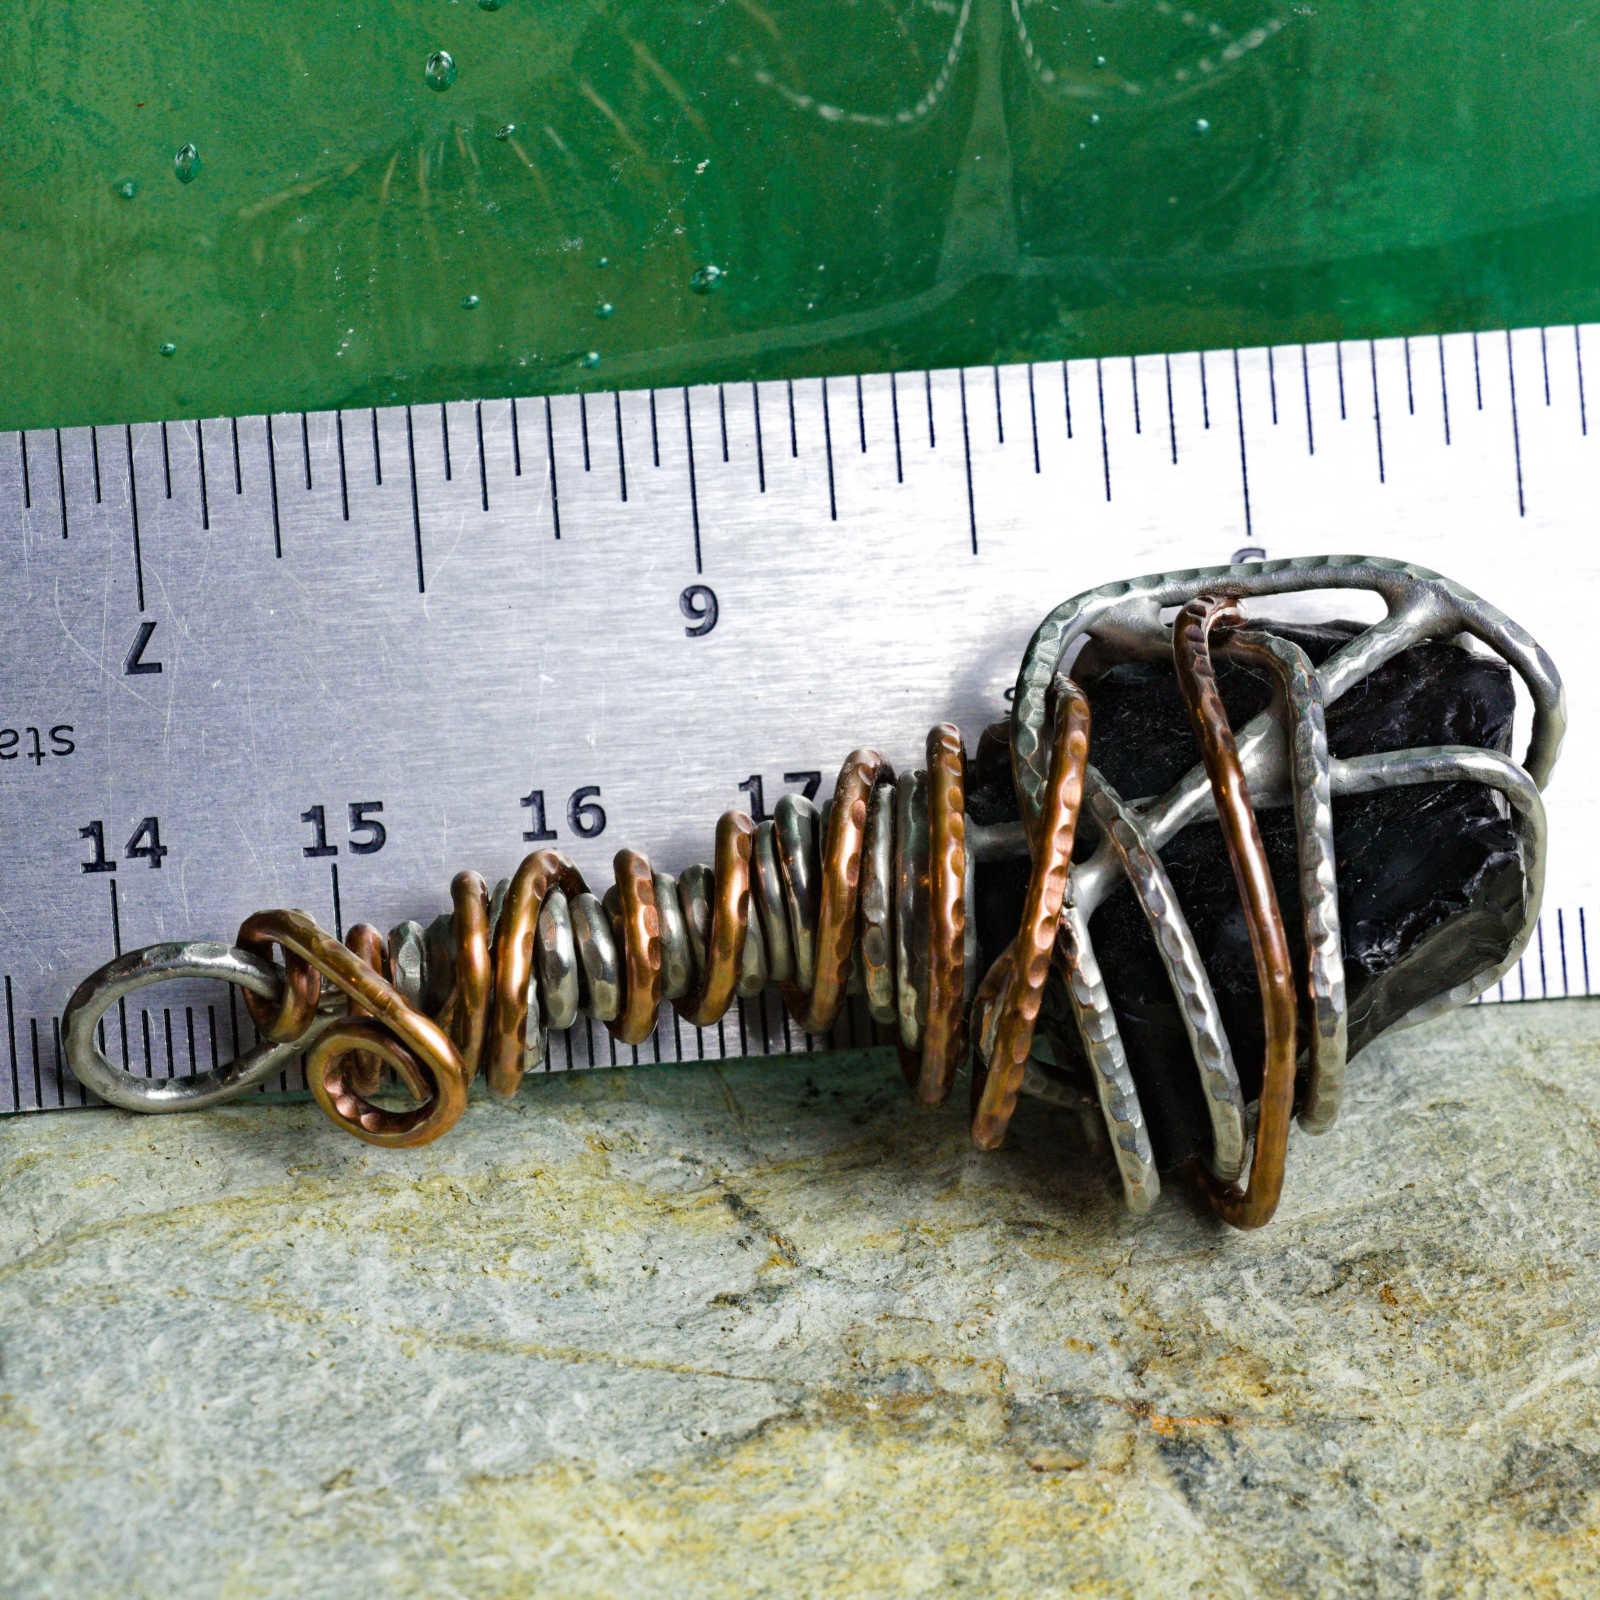 Copper slag accessory, with ruler to show scale